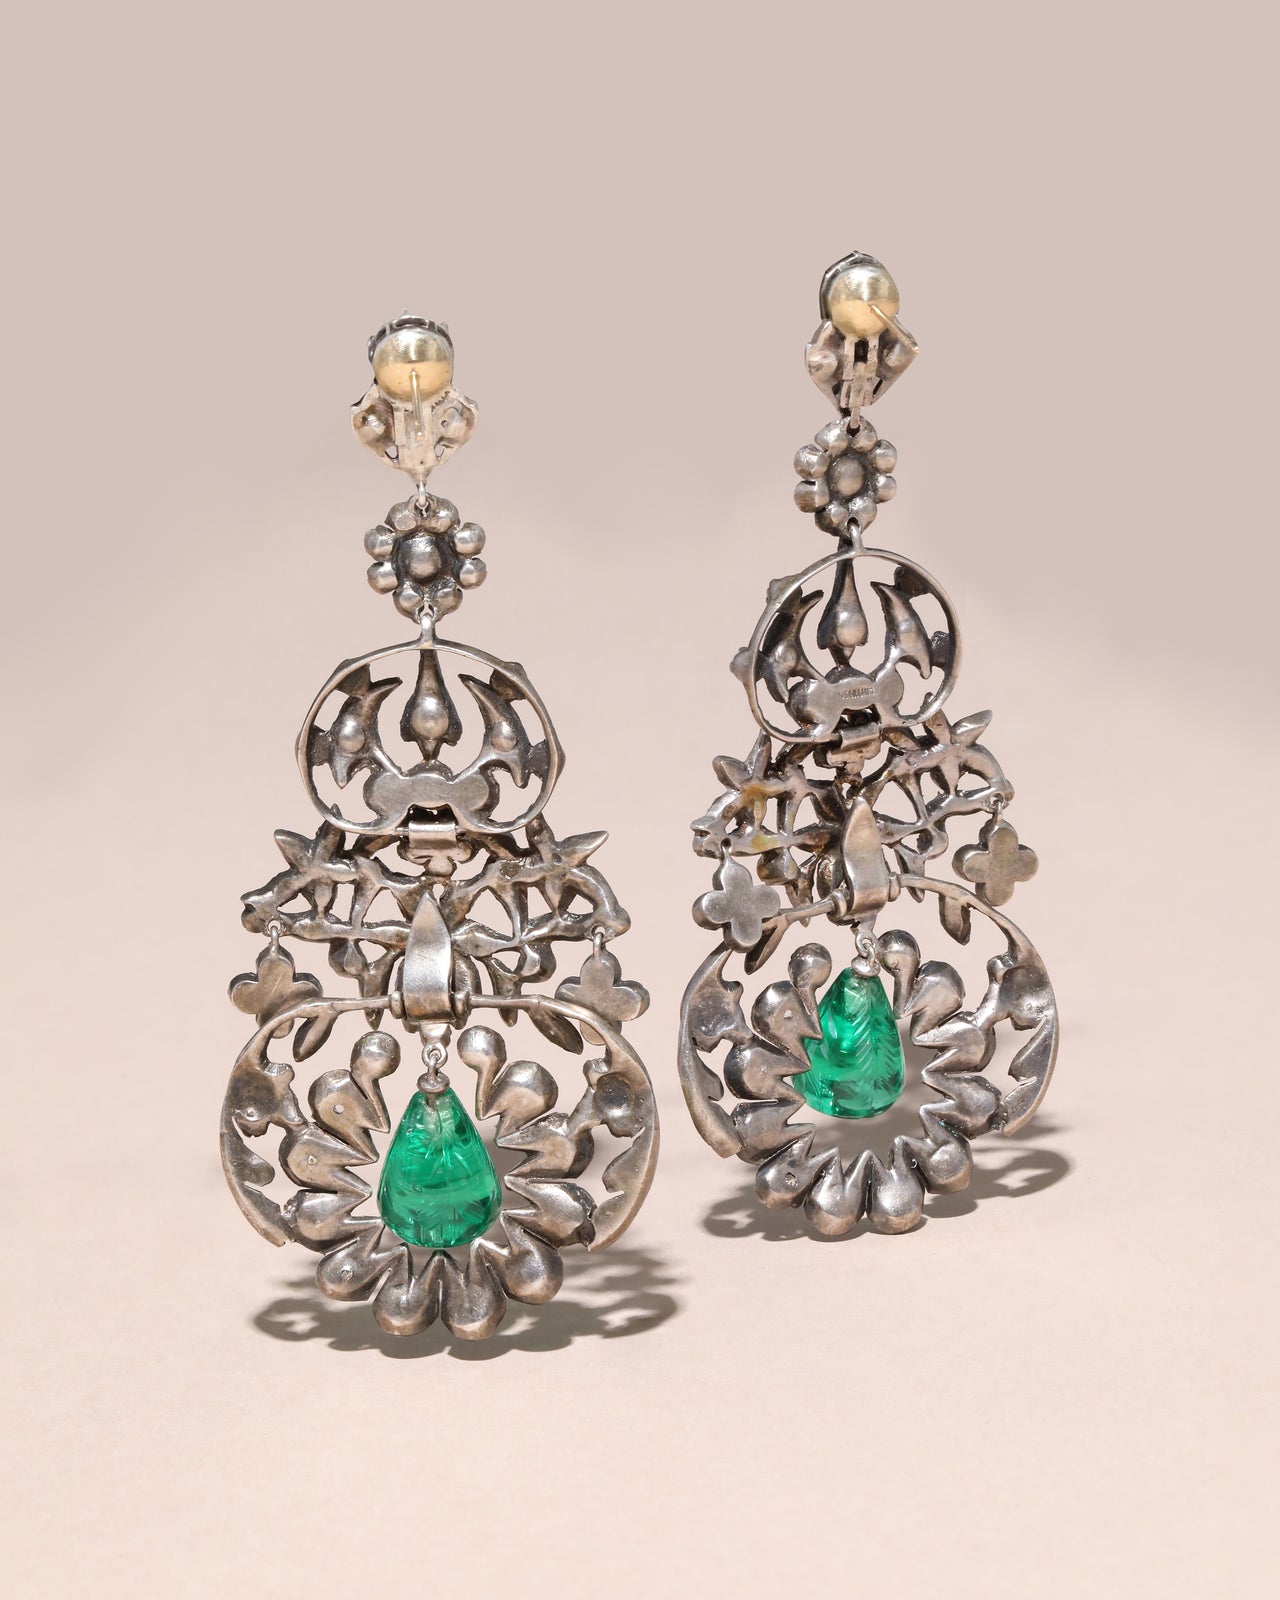 Antique Edwardian Sterling Silver & Paste Stone Earrings with Emerald Glass Drops - Photo 2